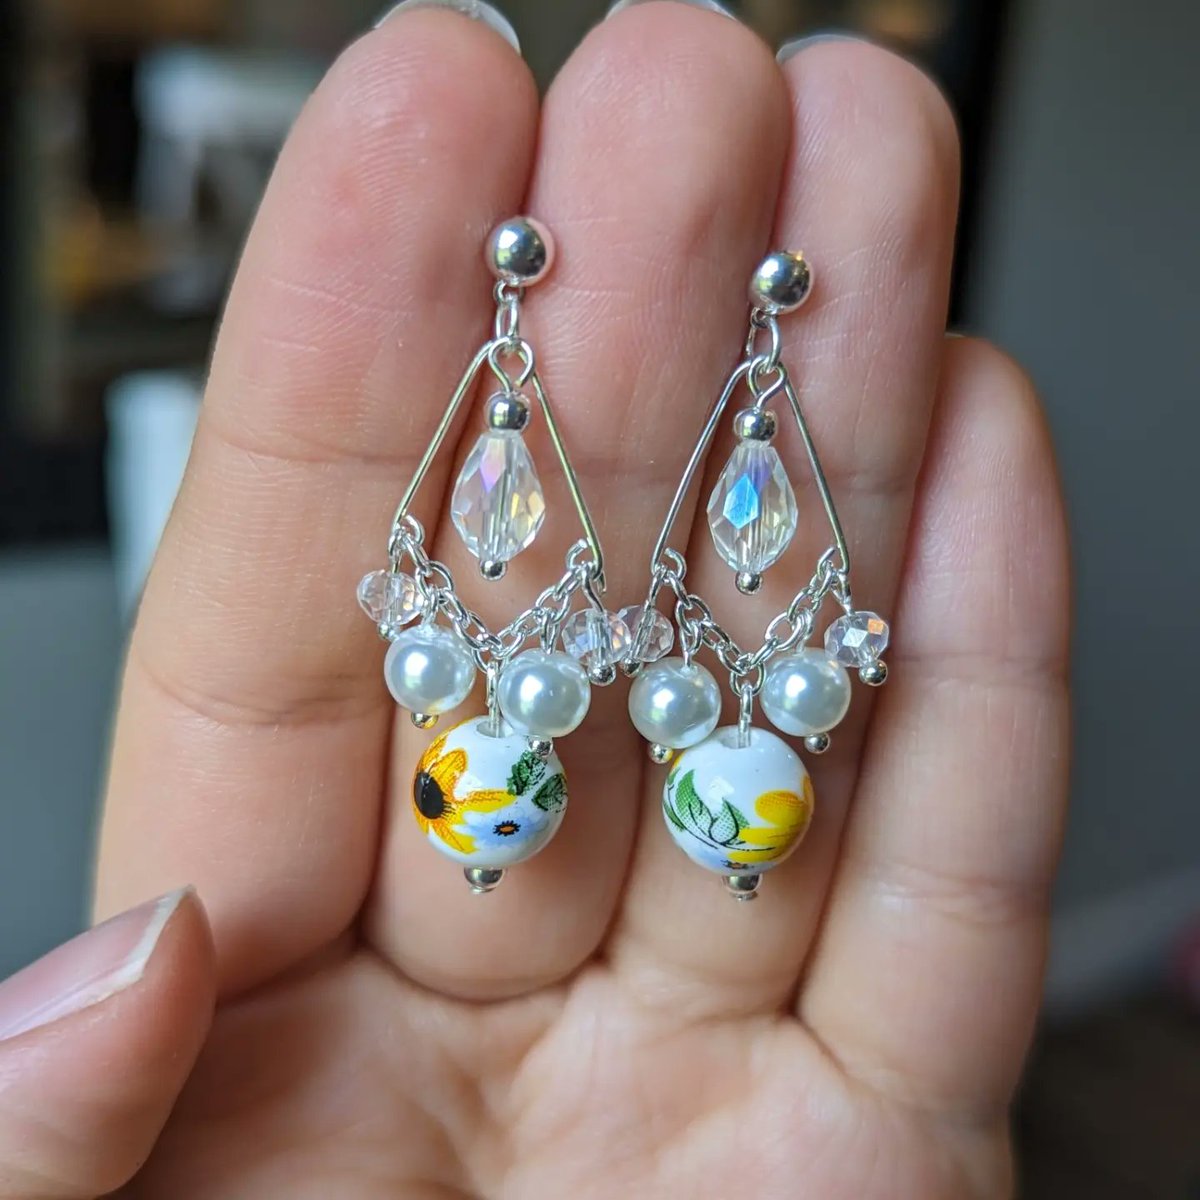 Today's craft is making some floral earrings. I have just been loving these floral porcelain beads they are so cute. What do you think, would you wear them?
#sunflower #earrings #flower #flowerjewelry #silver #silverearrings #handmade #sunflowerjewelry #calraejewelry